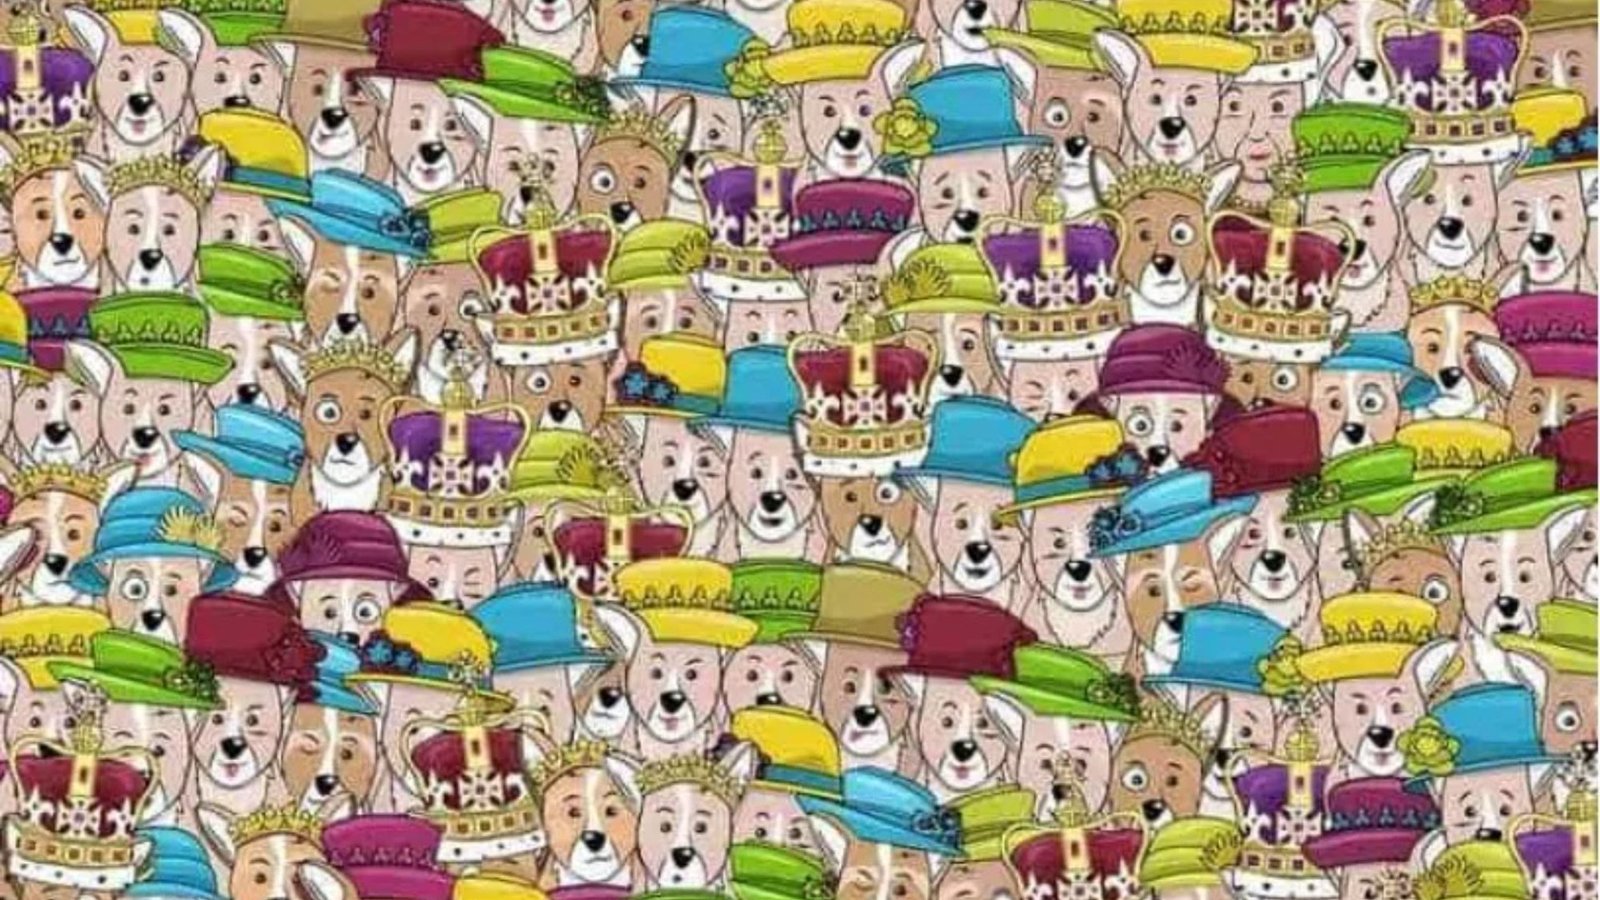 Everyone can spot the cute corgis but you need 20/20 vision to find the Queen in under 7 seconds – can you manage?